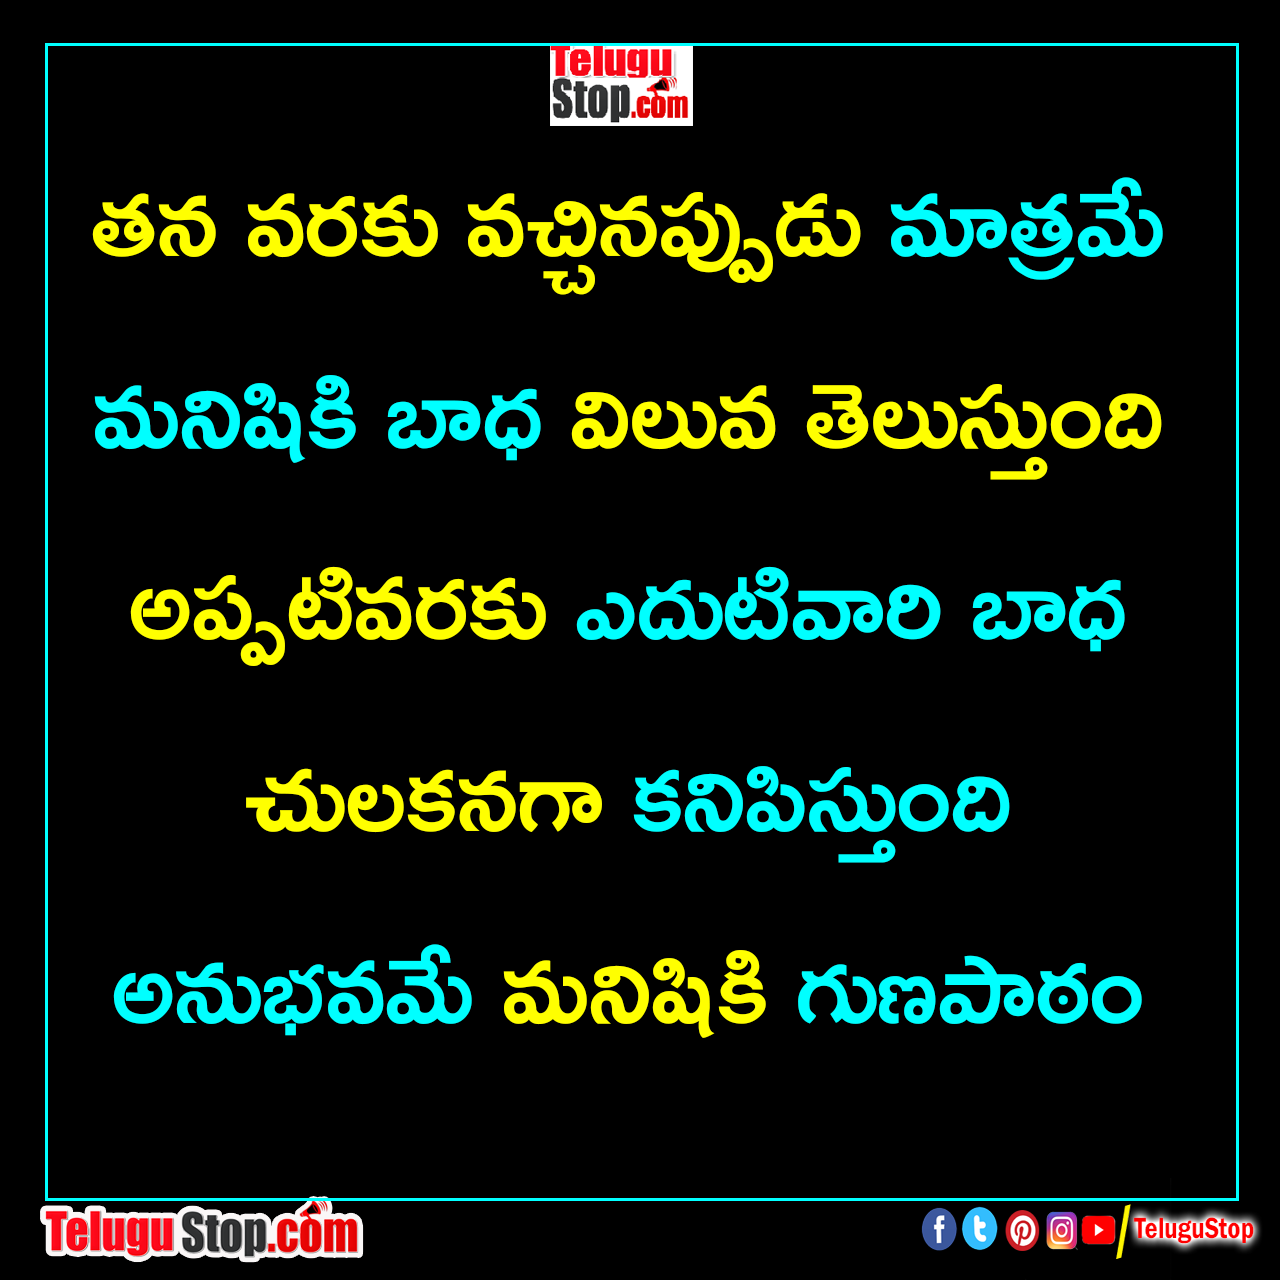 Experience is the lesson for man quotes in telugu inspirational quotes